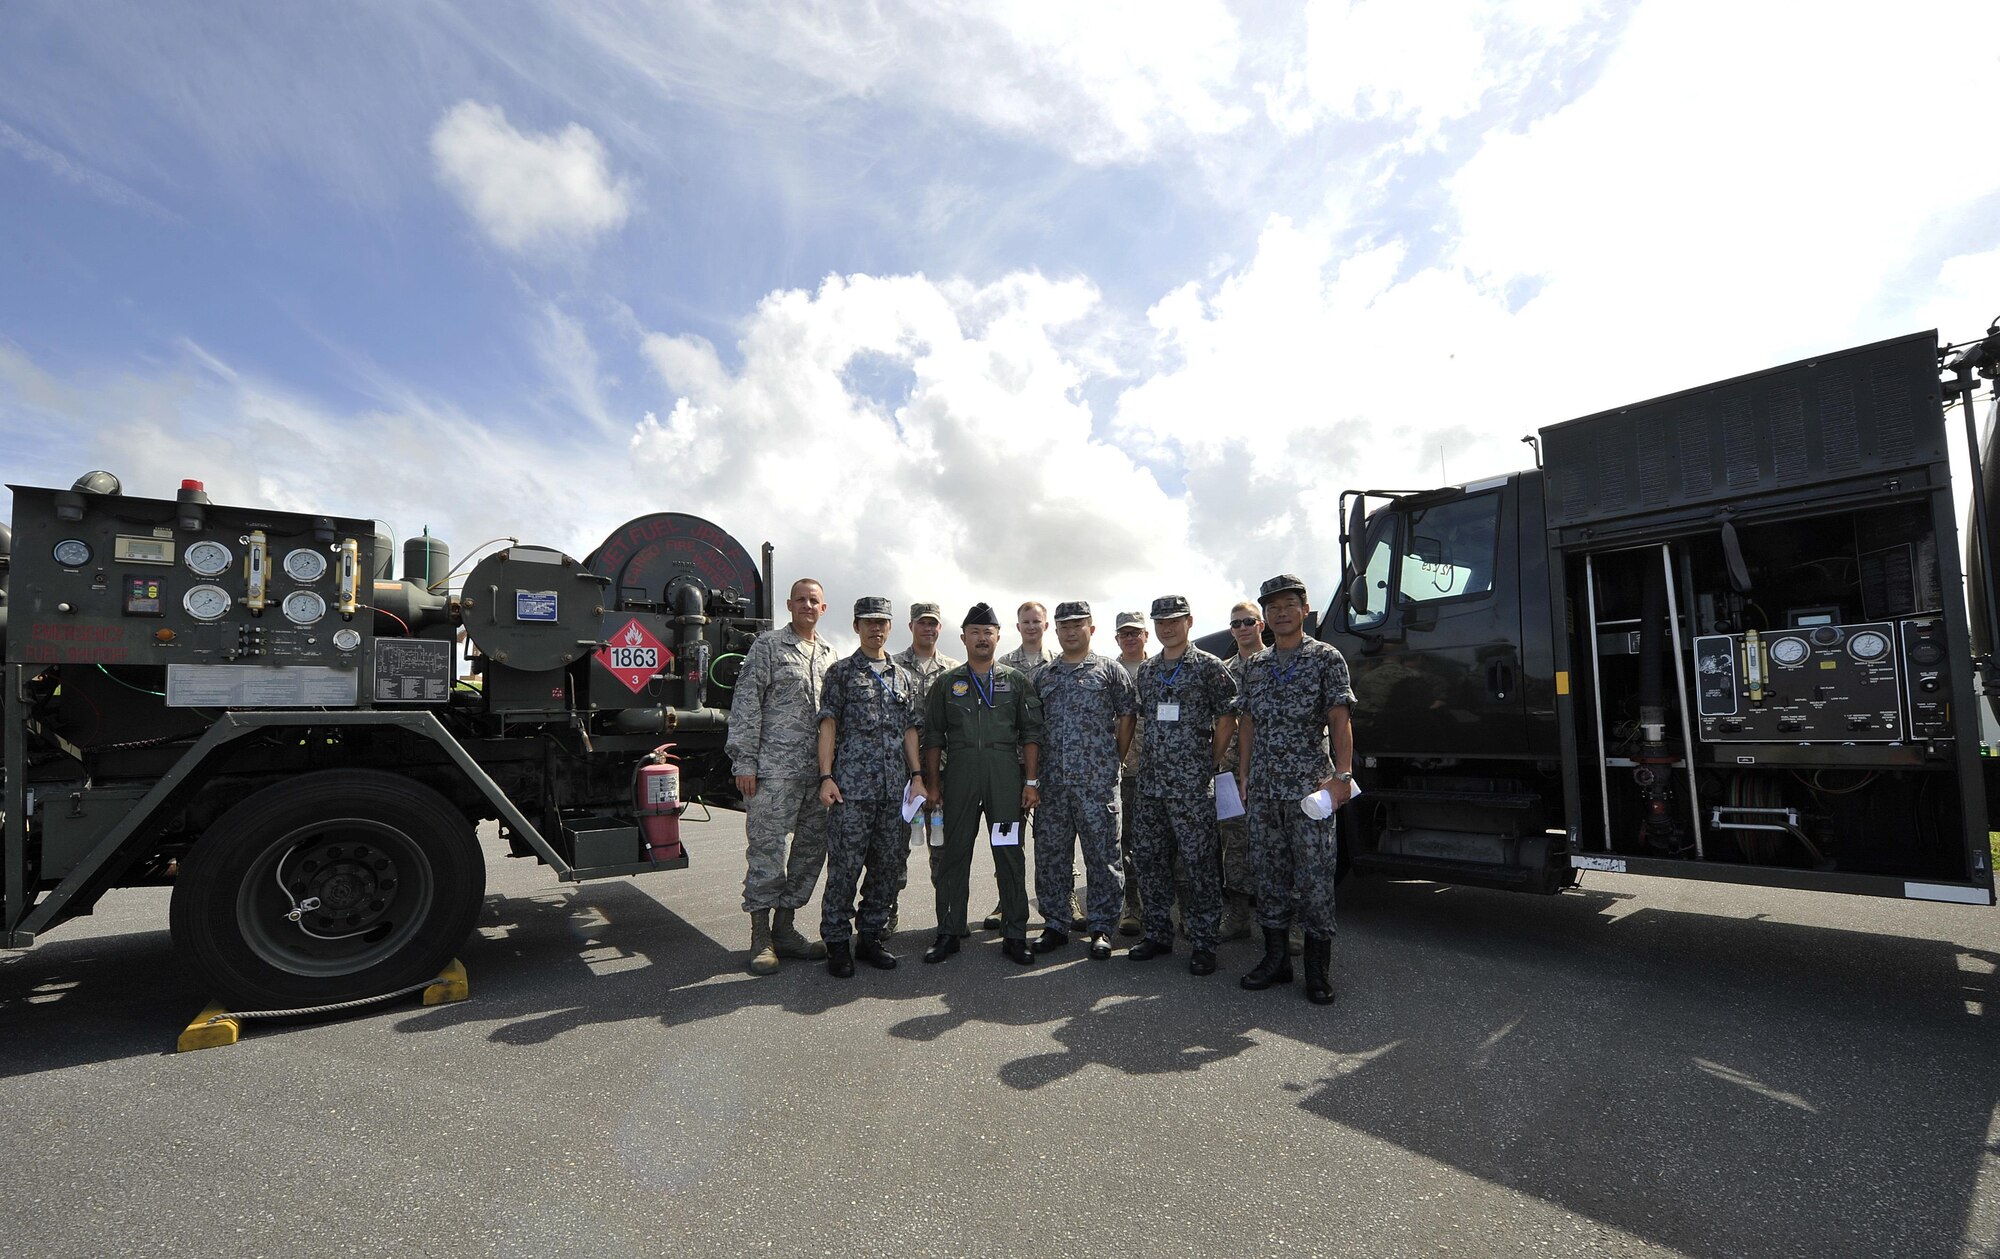 Japan Air Self Defense Force officers observe the 18th Logistics Readiness Squadron's facilities, July 21, 2016, at Kadena Air Base, Japan. The tour is an opportunity for professional networking throughout Okinawa's fuels community and also to share ideas on the most effective methods and equipment for delivering jet fuel. (U.S. Air Force photo by Naoto Anazawa)